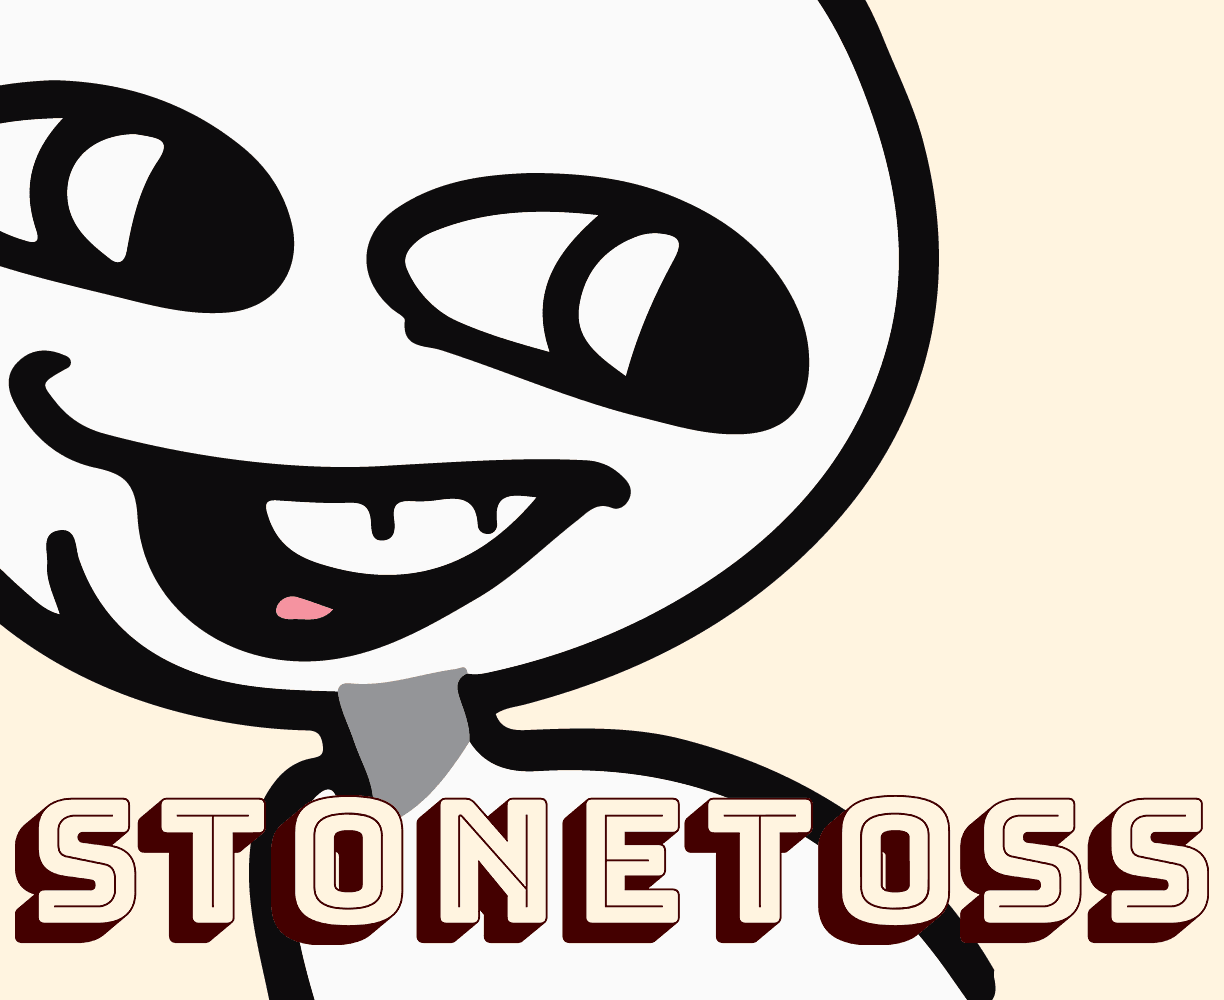 The cover art for the episode Malgorithm from the comics series Stonetoss, which is number 288 in the series